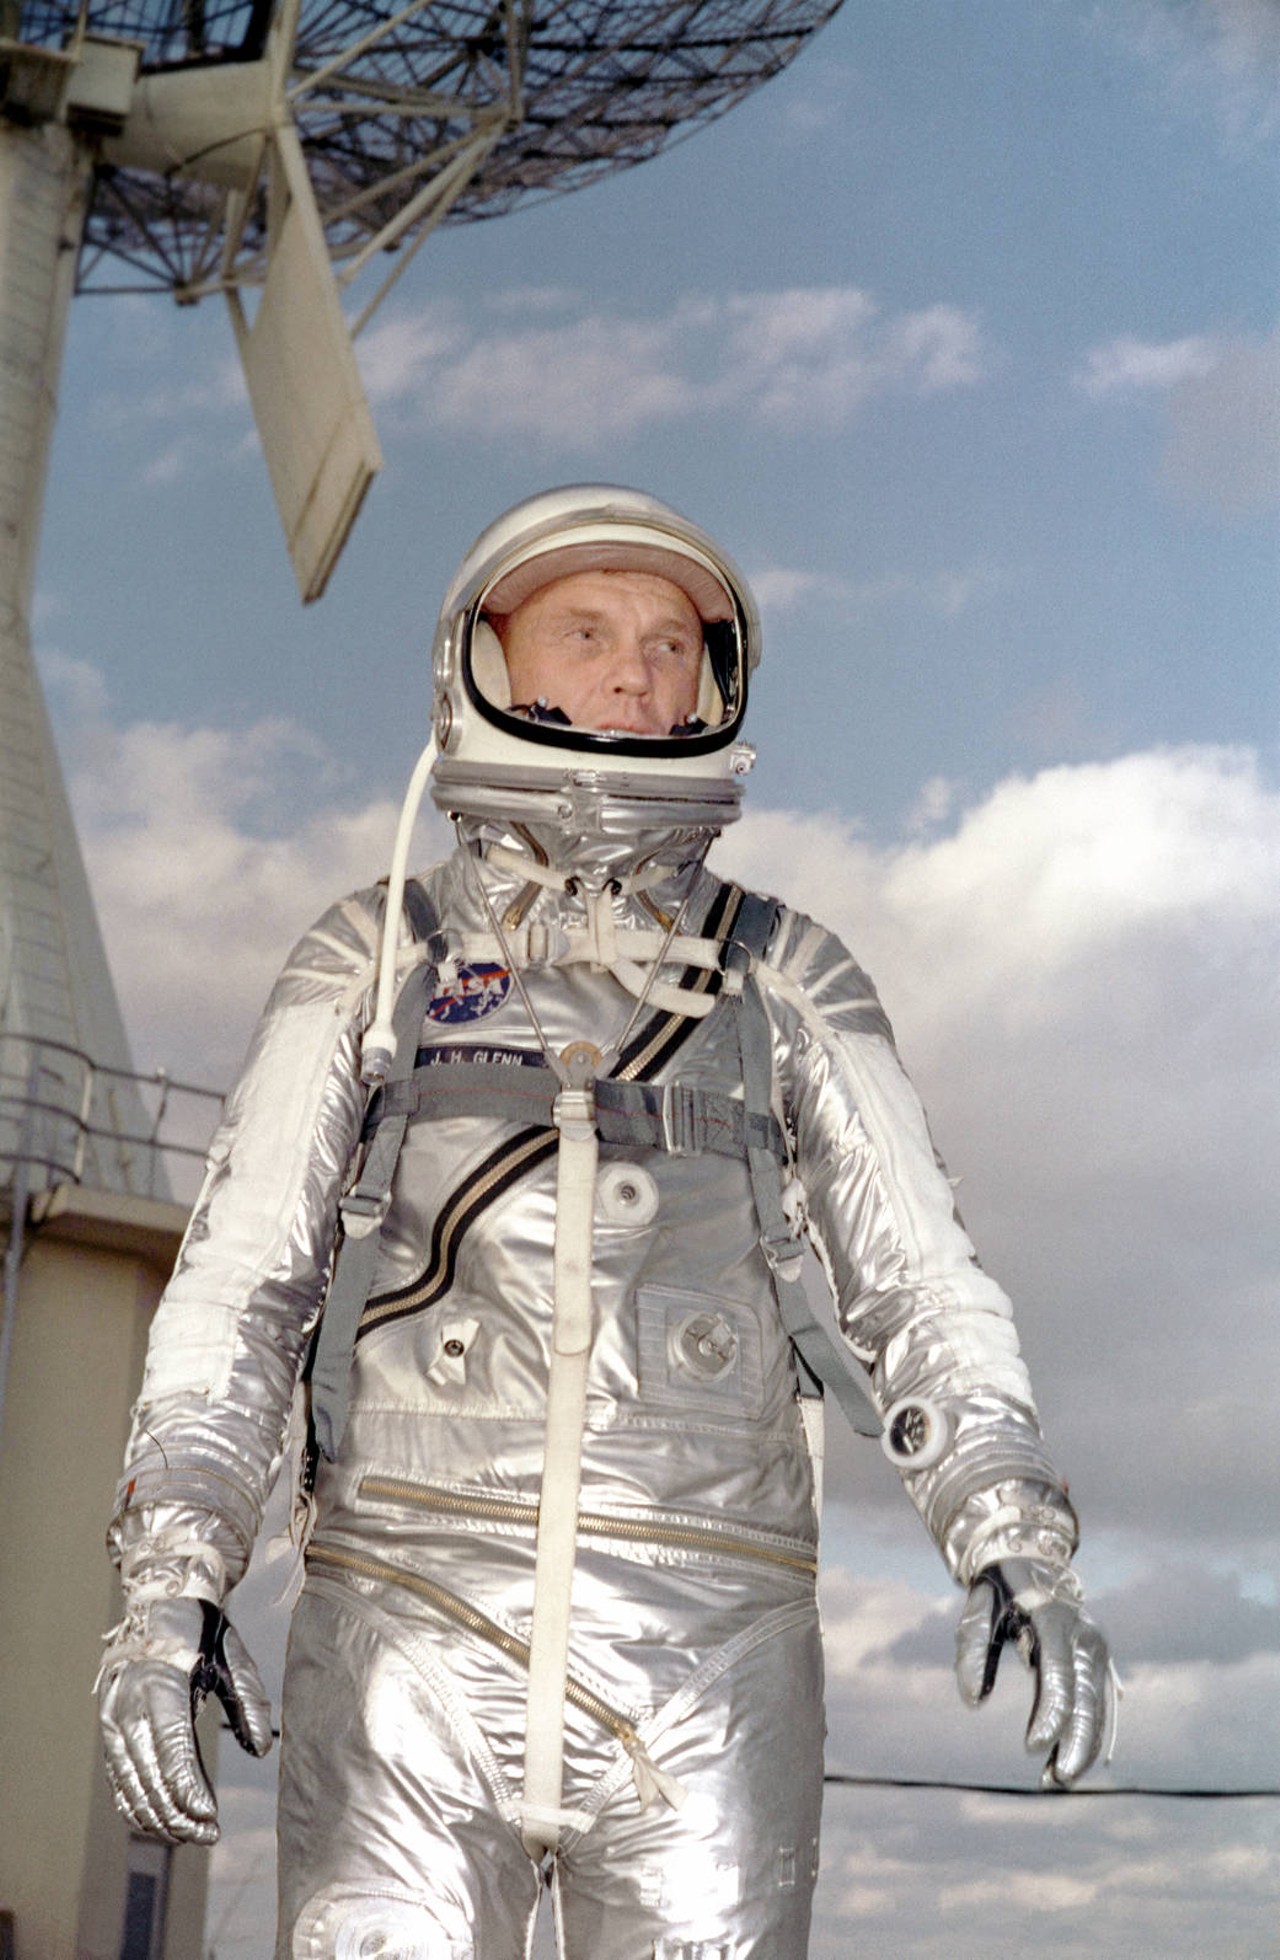 Astronaut John H. Glenn Jr. in his silver Mercury spacesuit during pre- flight training activities at Cape Canaveral.